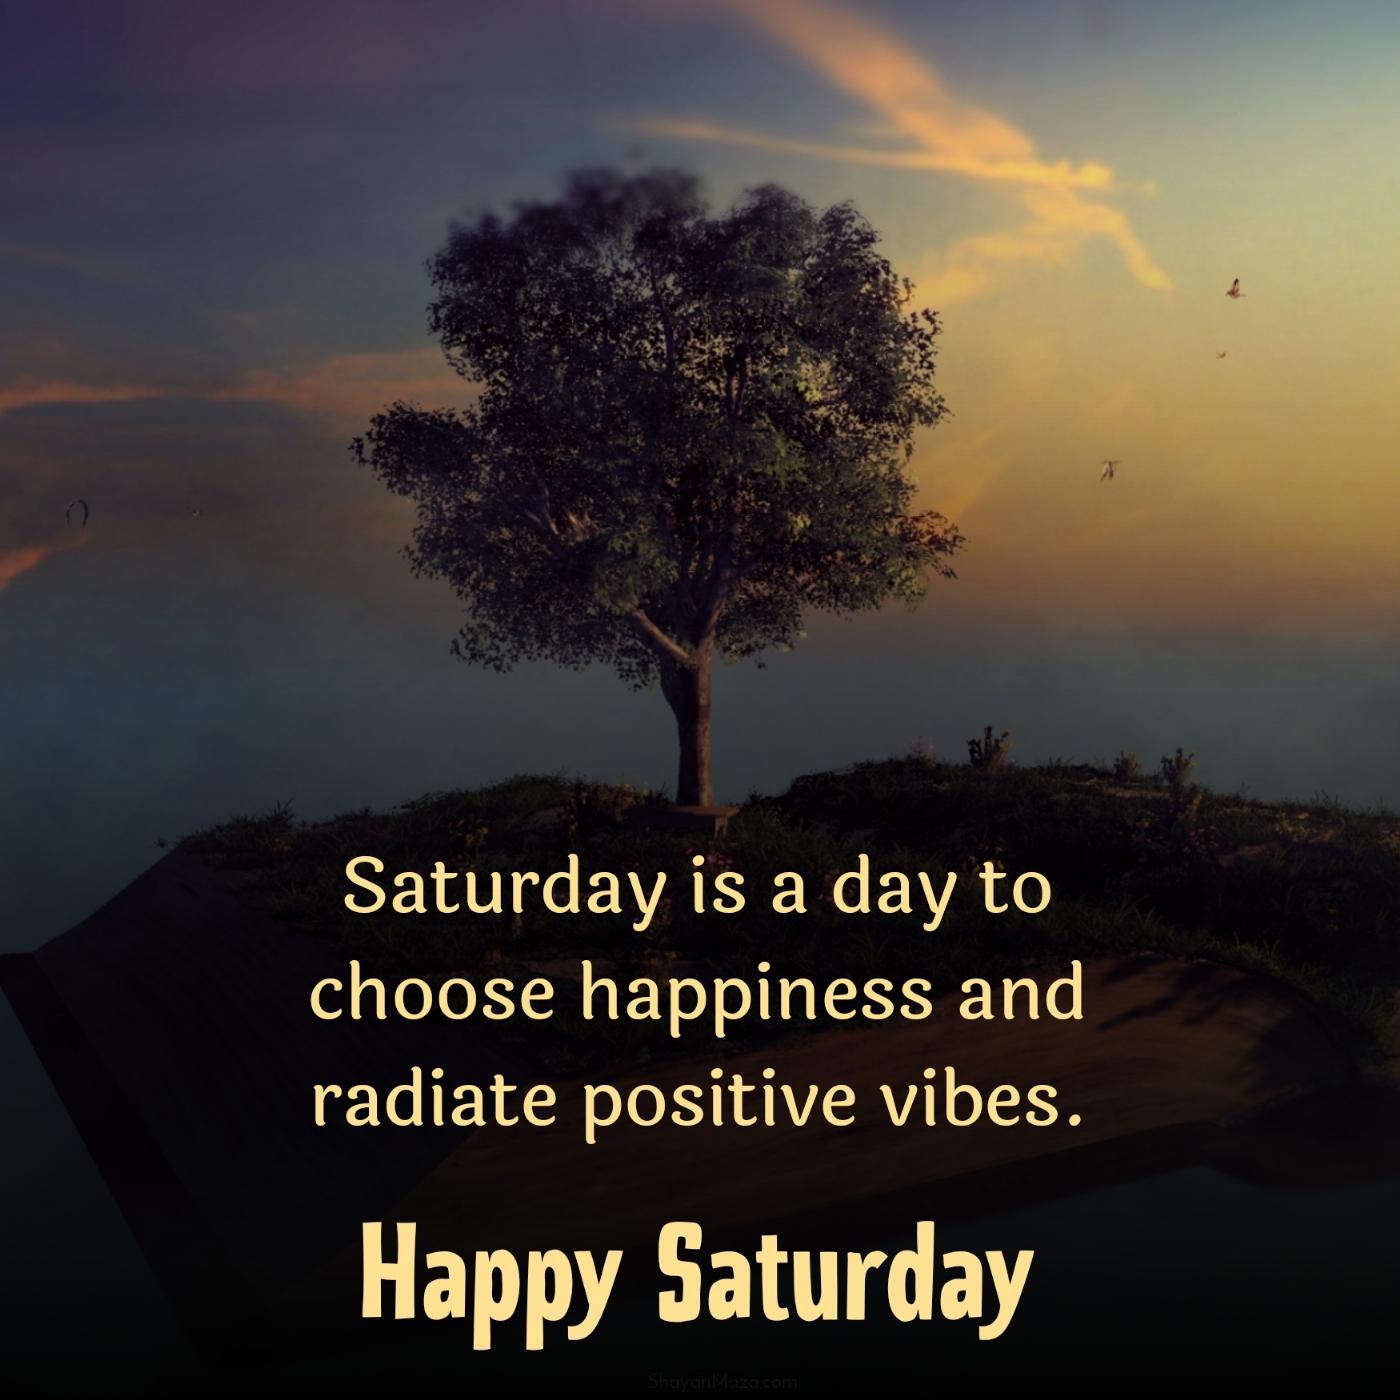 Saturday is a day to choose happiness and radiate positive vibes